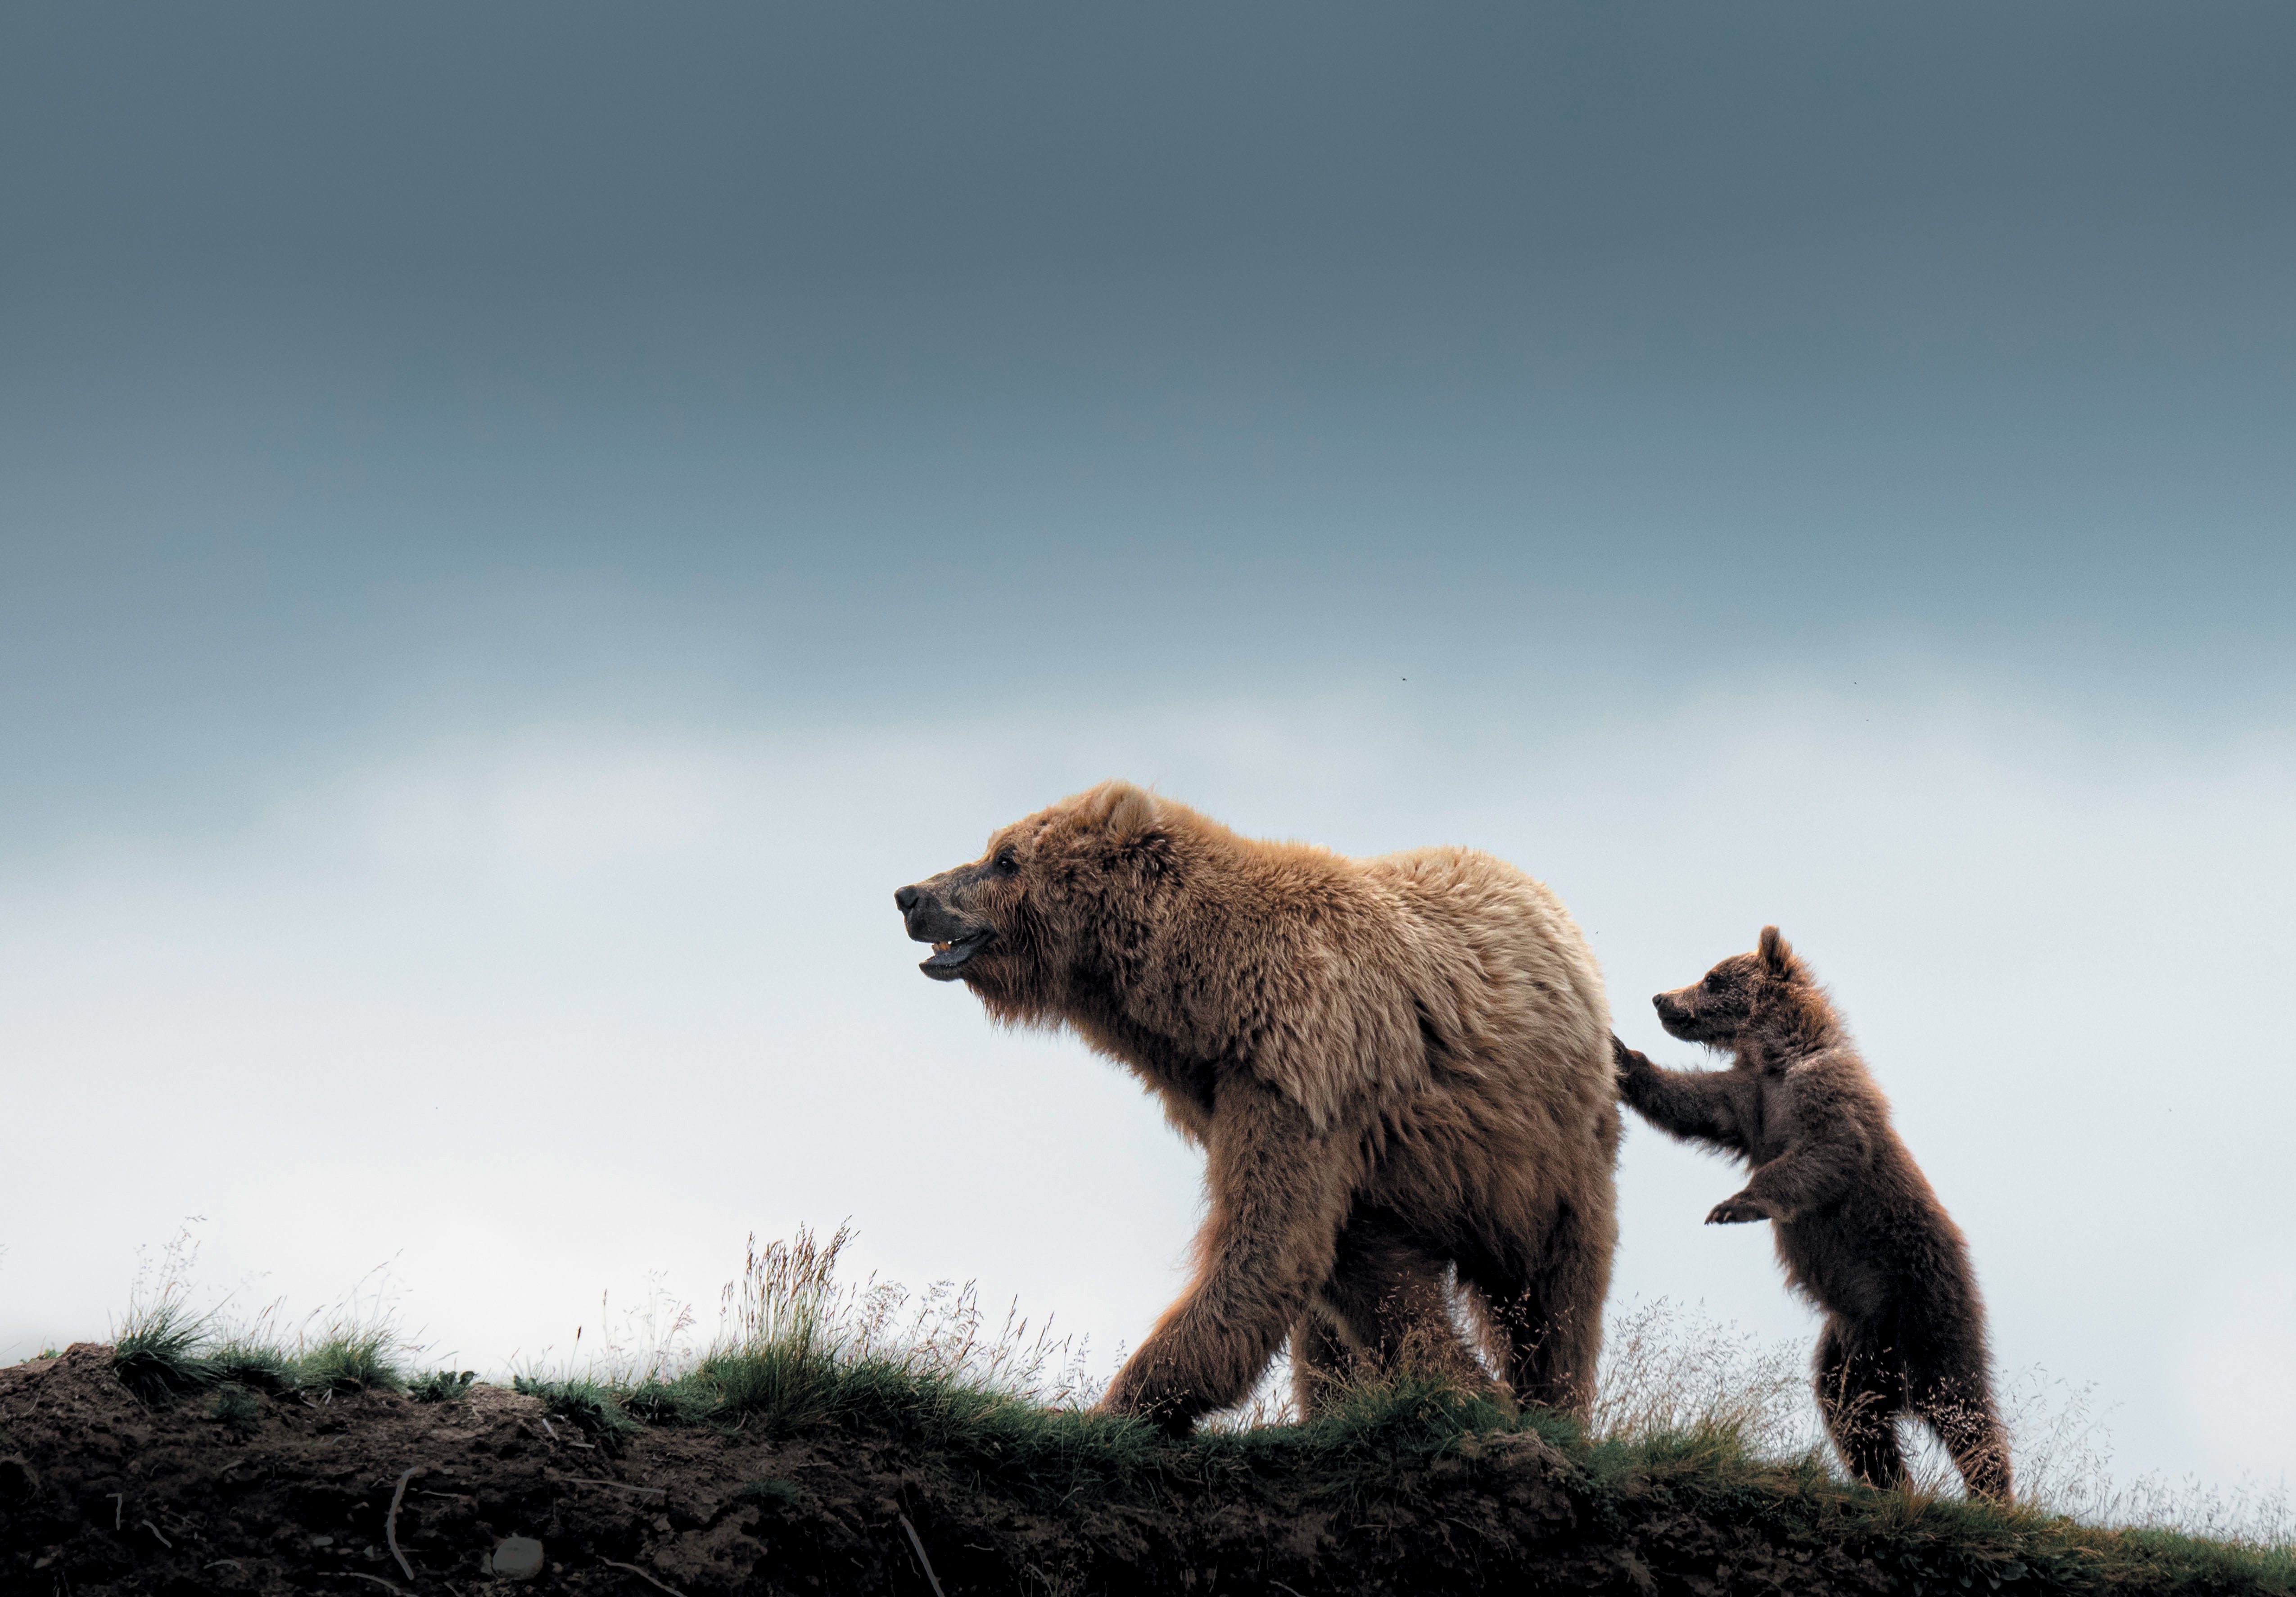 A large grizzly bear and a bear cub